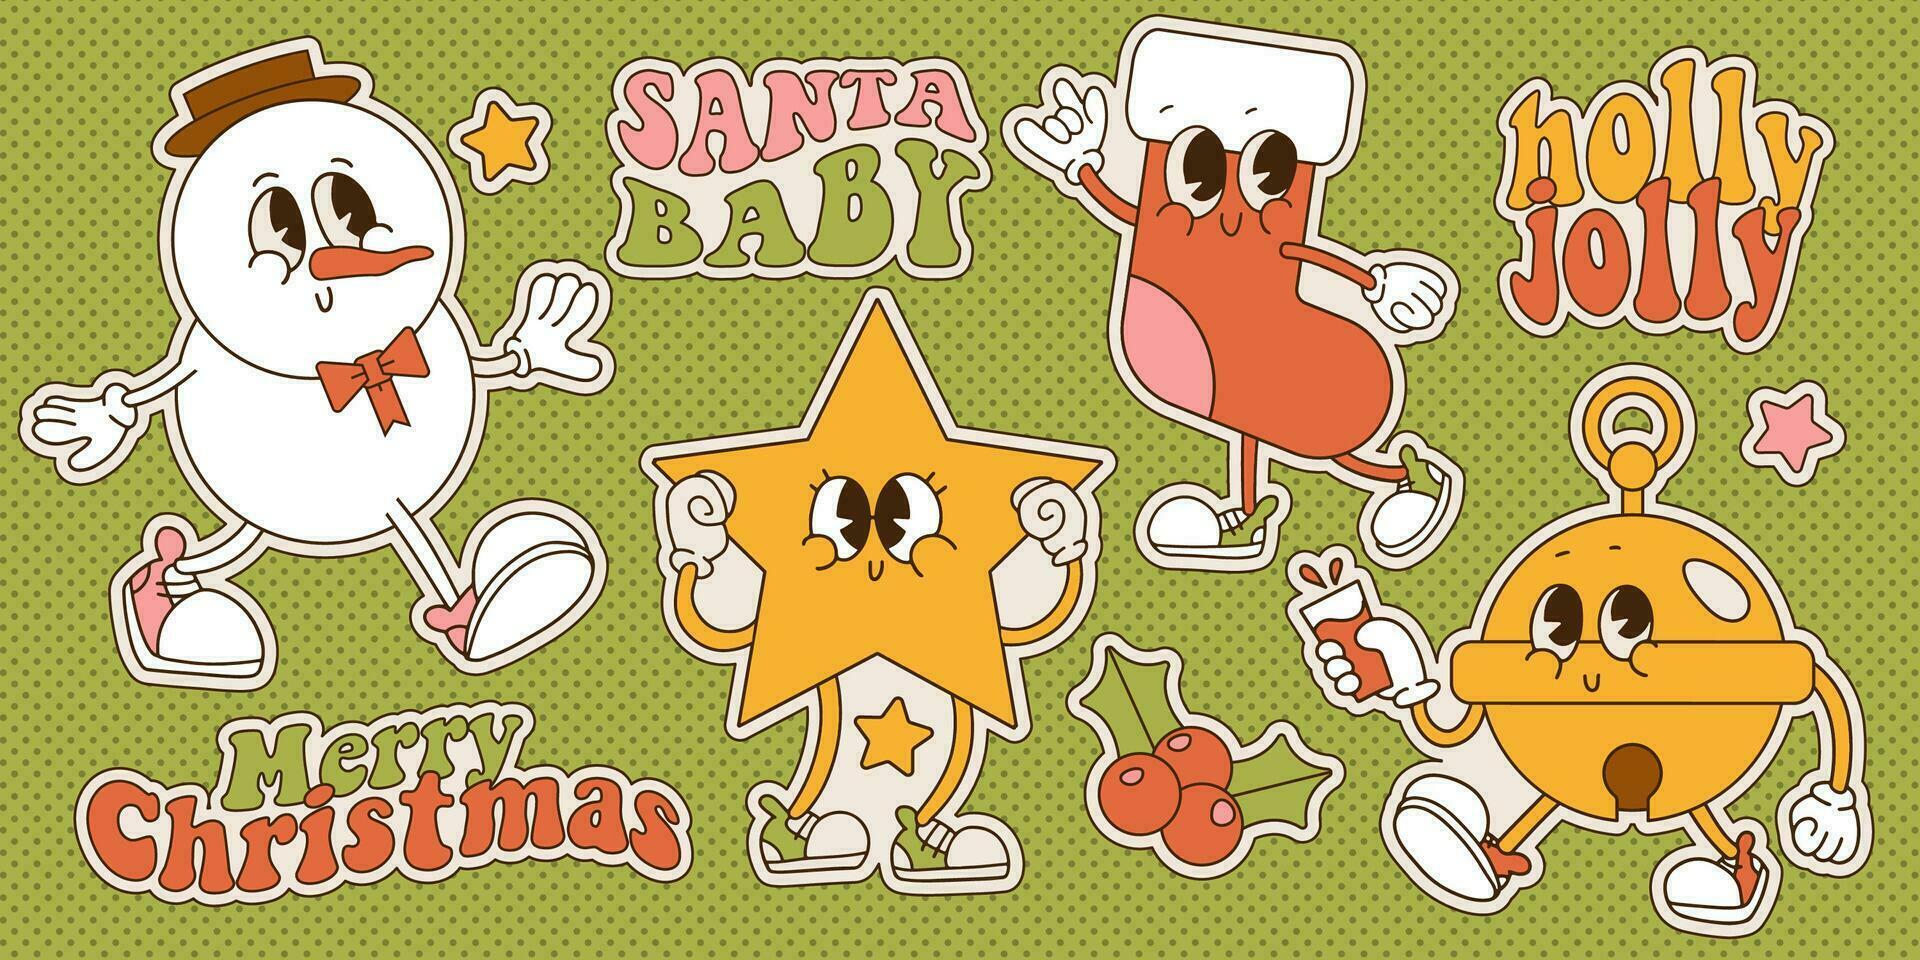 Merry Christmas retro collection 40s cartoon mascot characters. Snowman, Christmas tree, Santa Claus, holiday elements. 50s, 60s old animation style. Vintage vector. Cheerful, happy emotions. Isolated vector